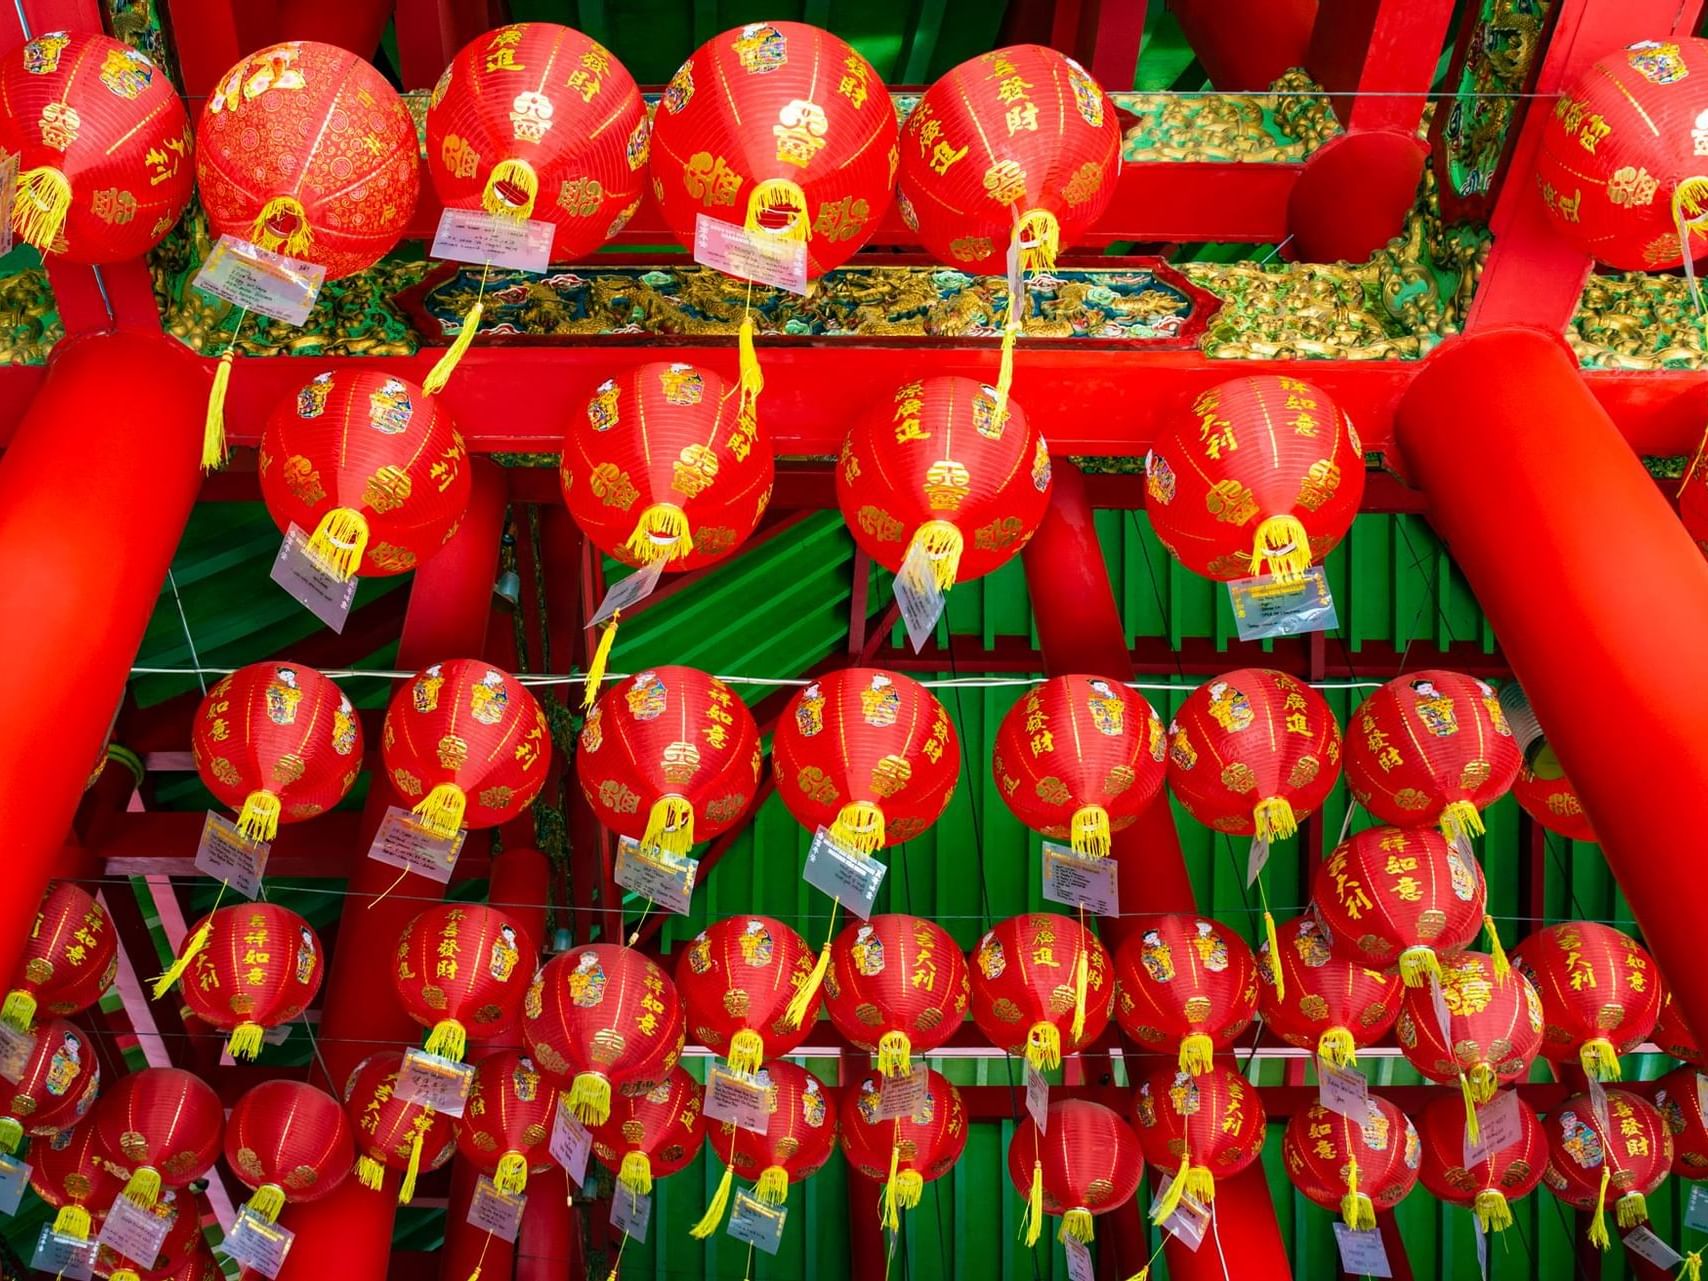 Rows of red chinese lanterns